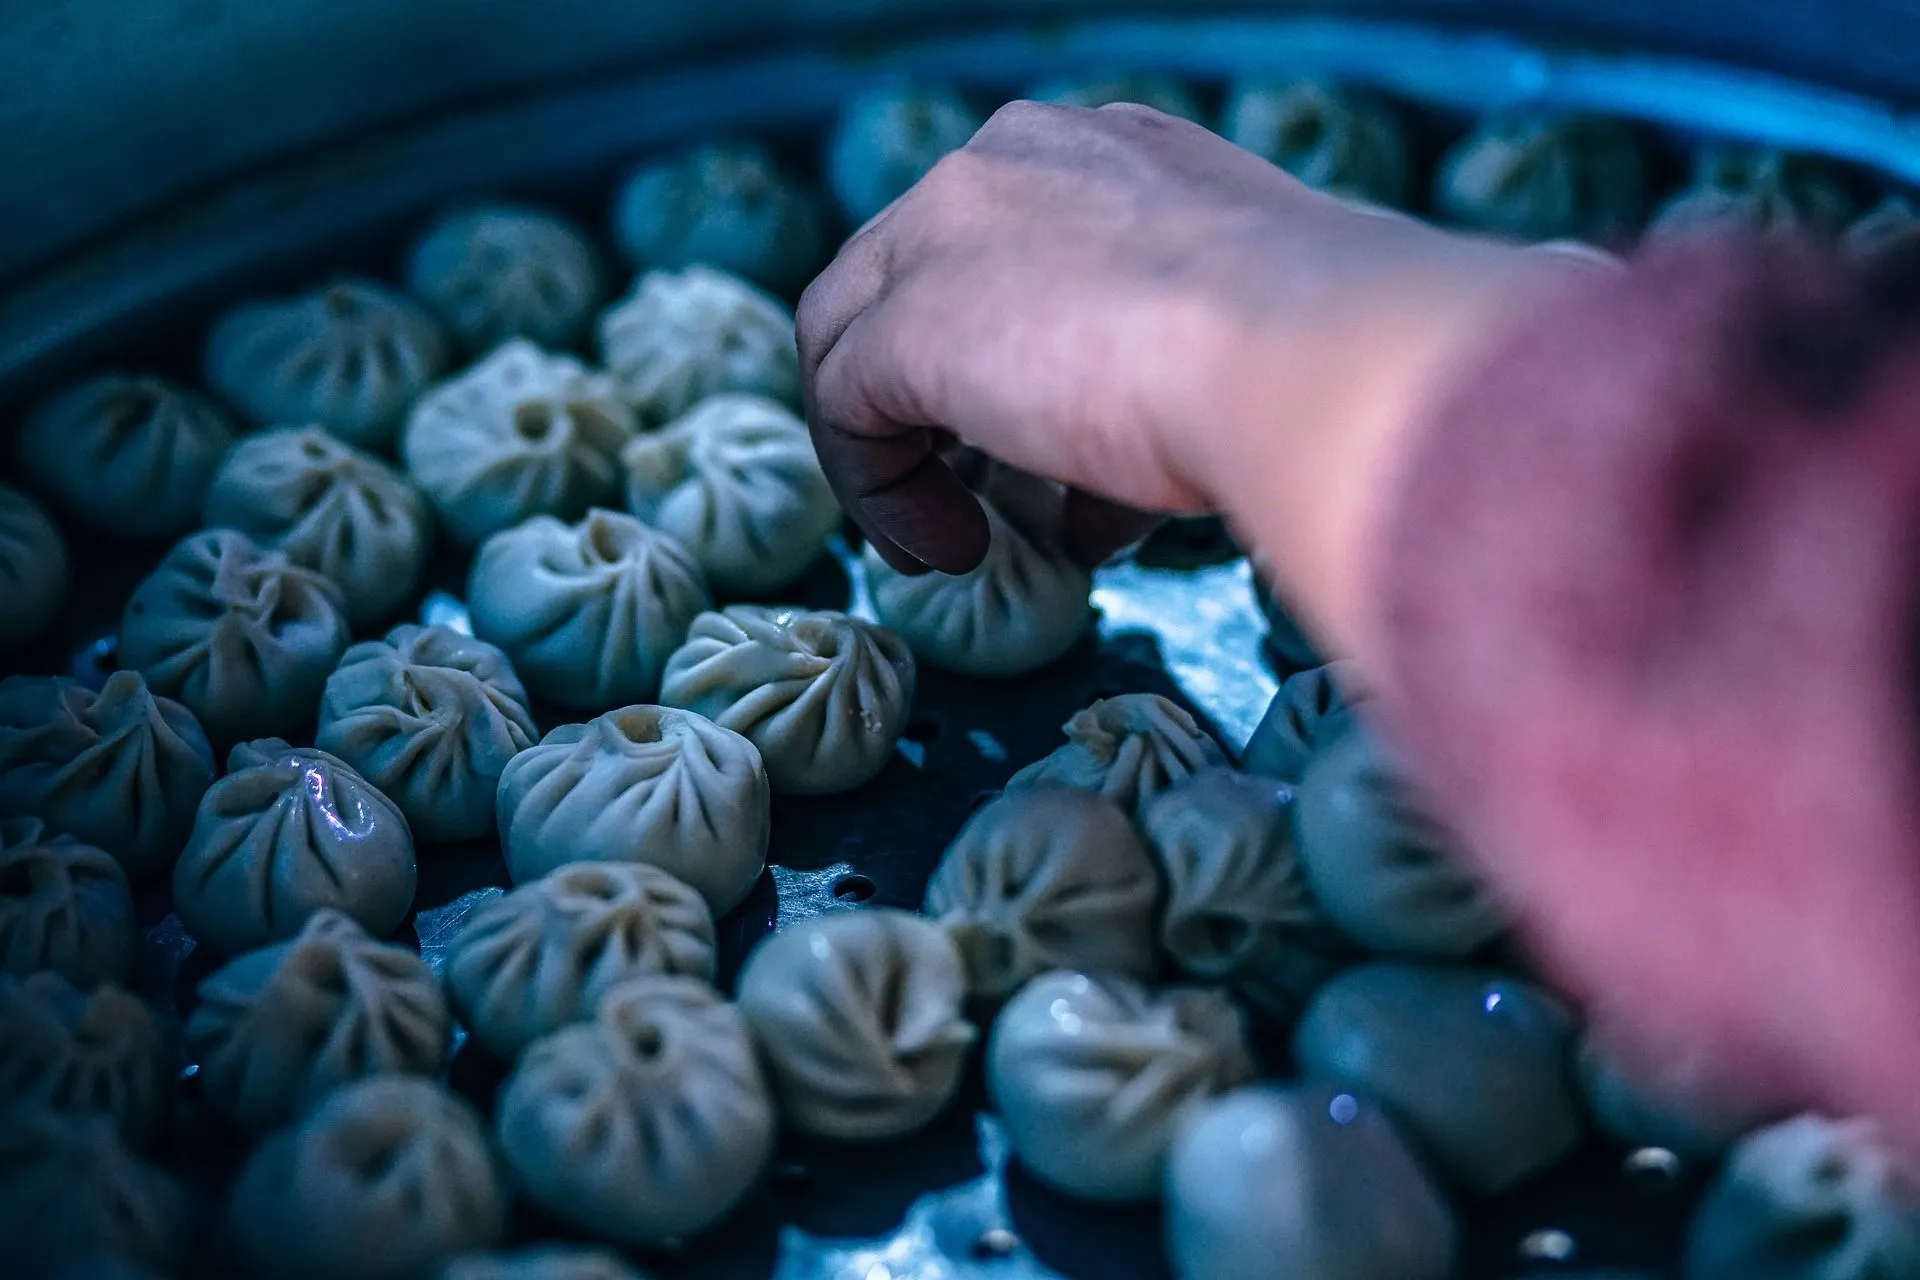 The Chinese have been making dumplings for over 1,000 years!